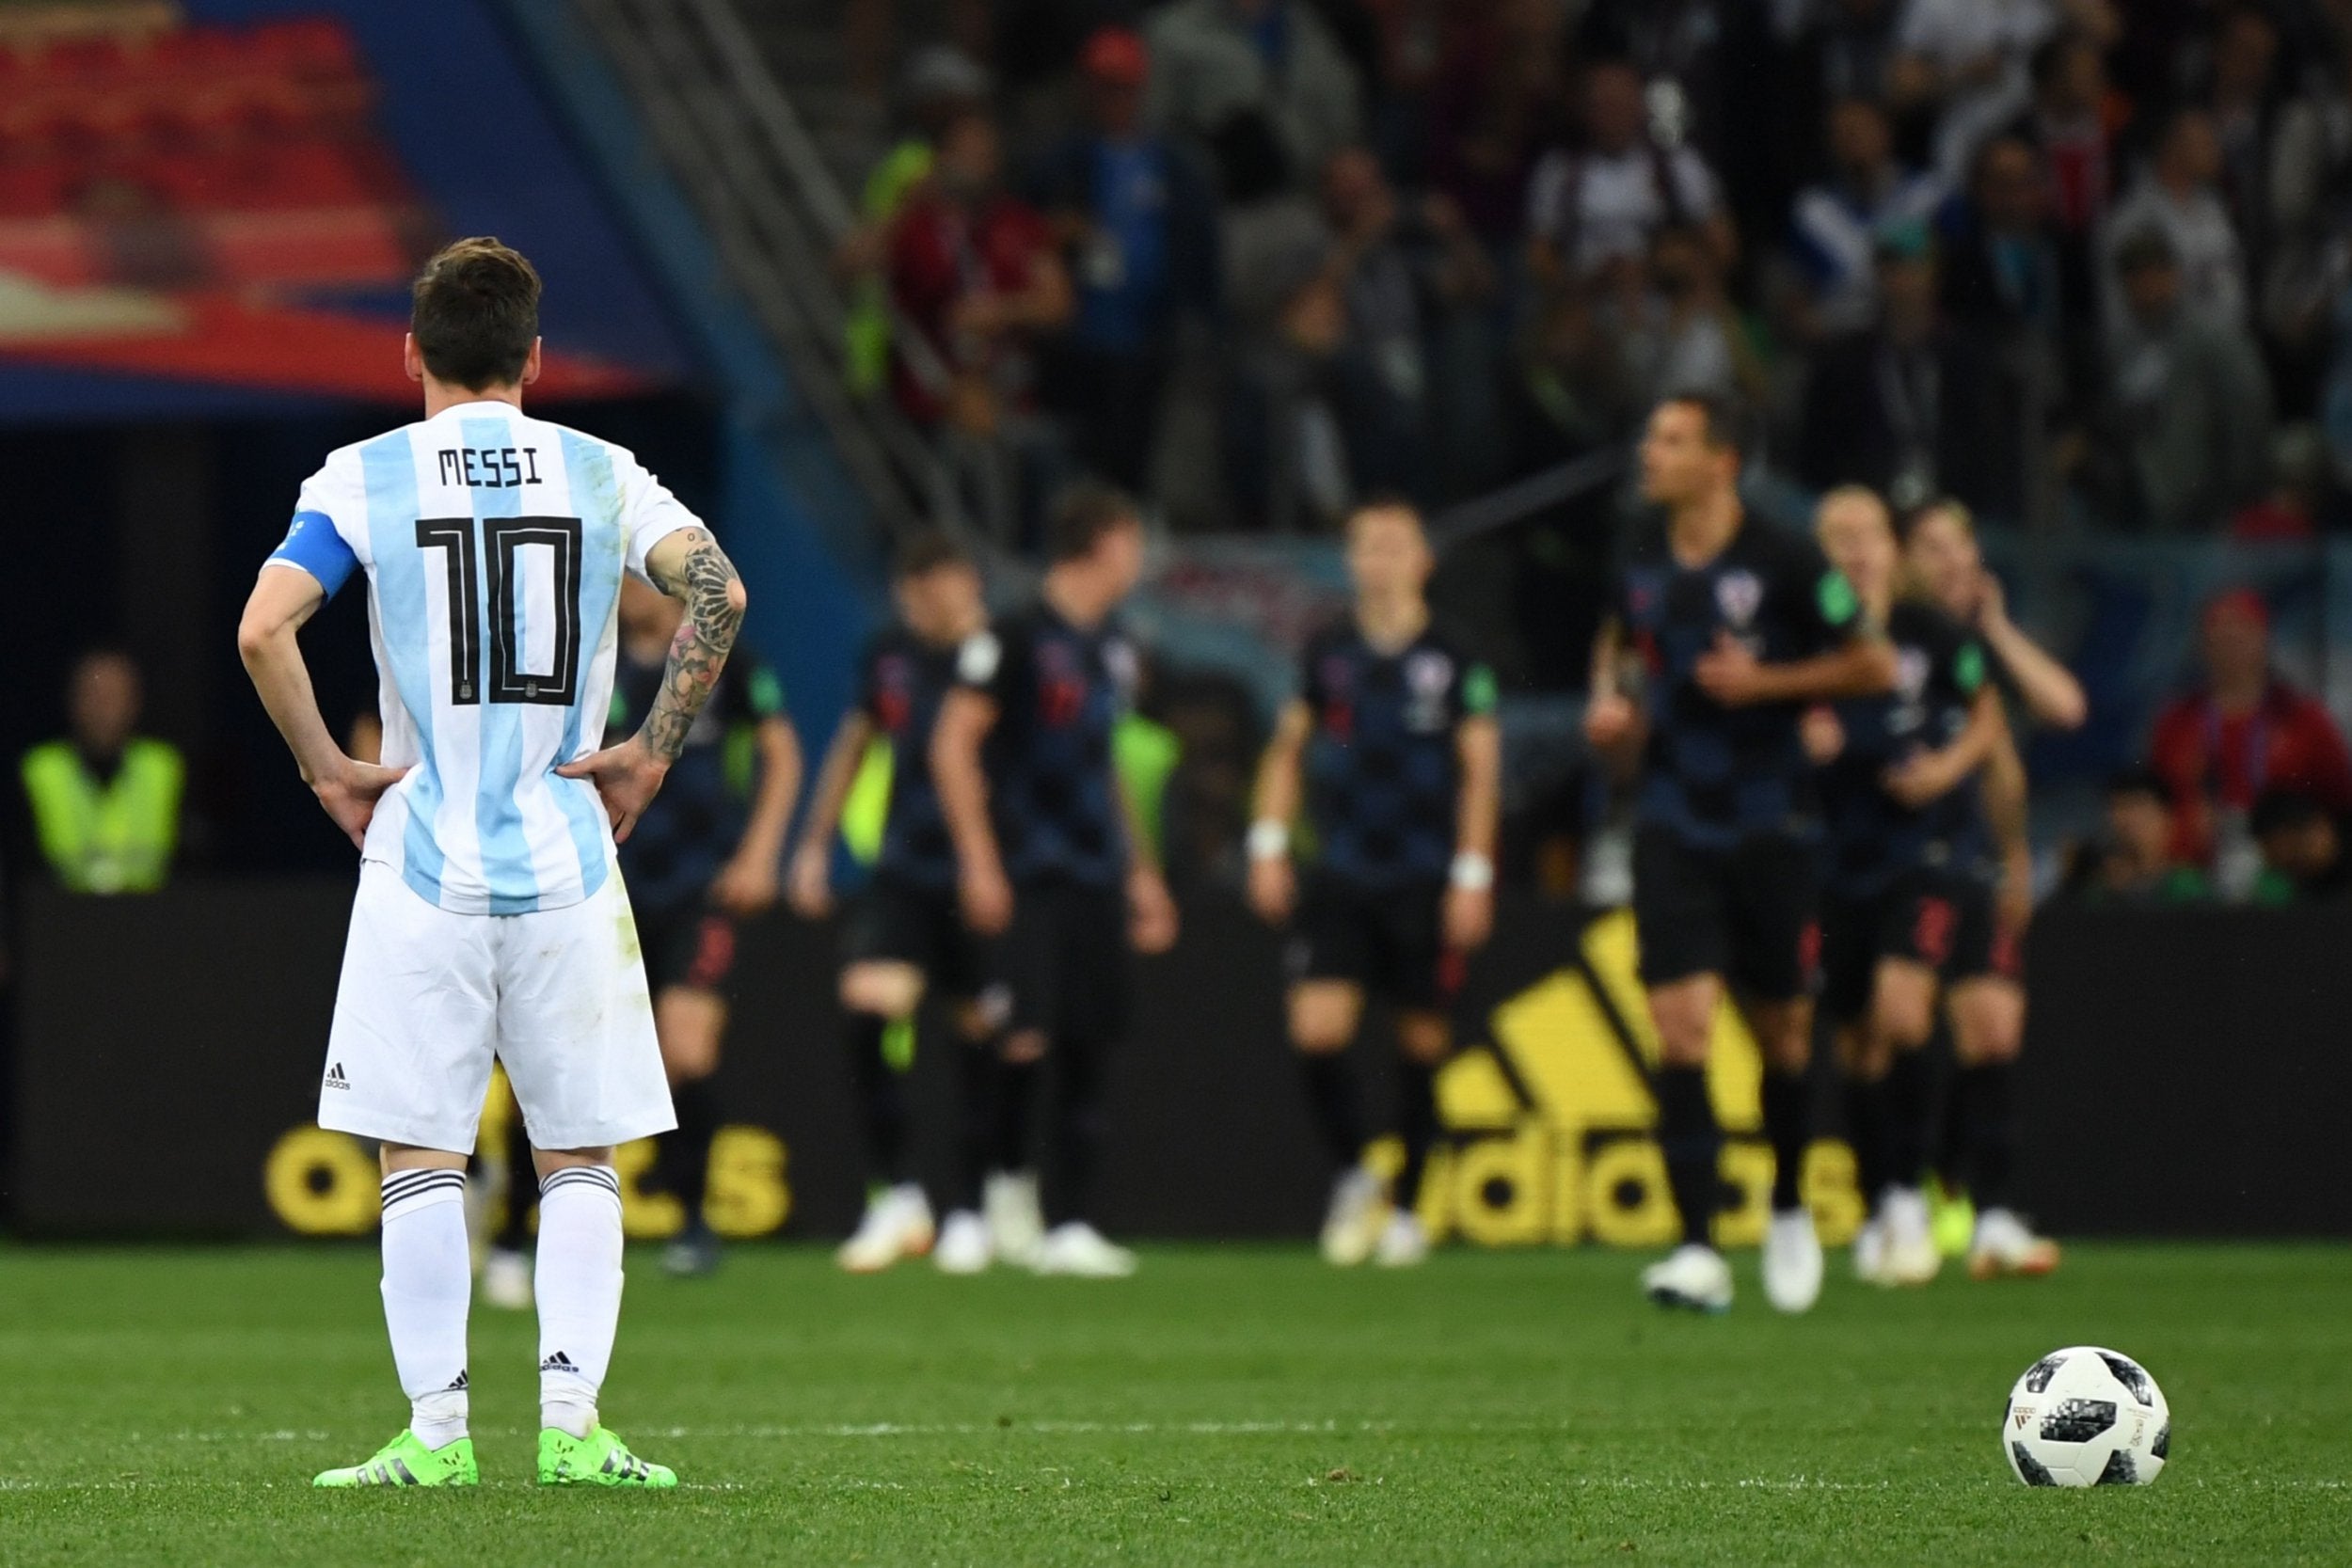 World Cup: Lionel Messi remains the greatest – but Russia 2018 has not